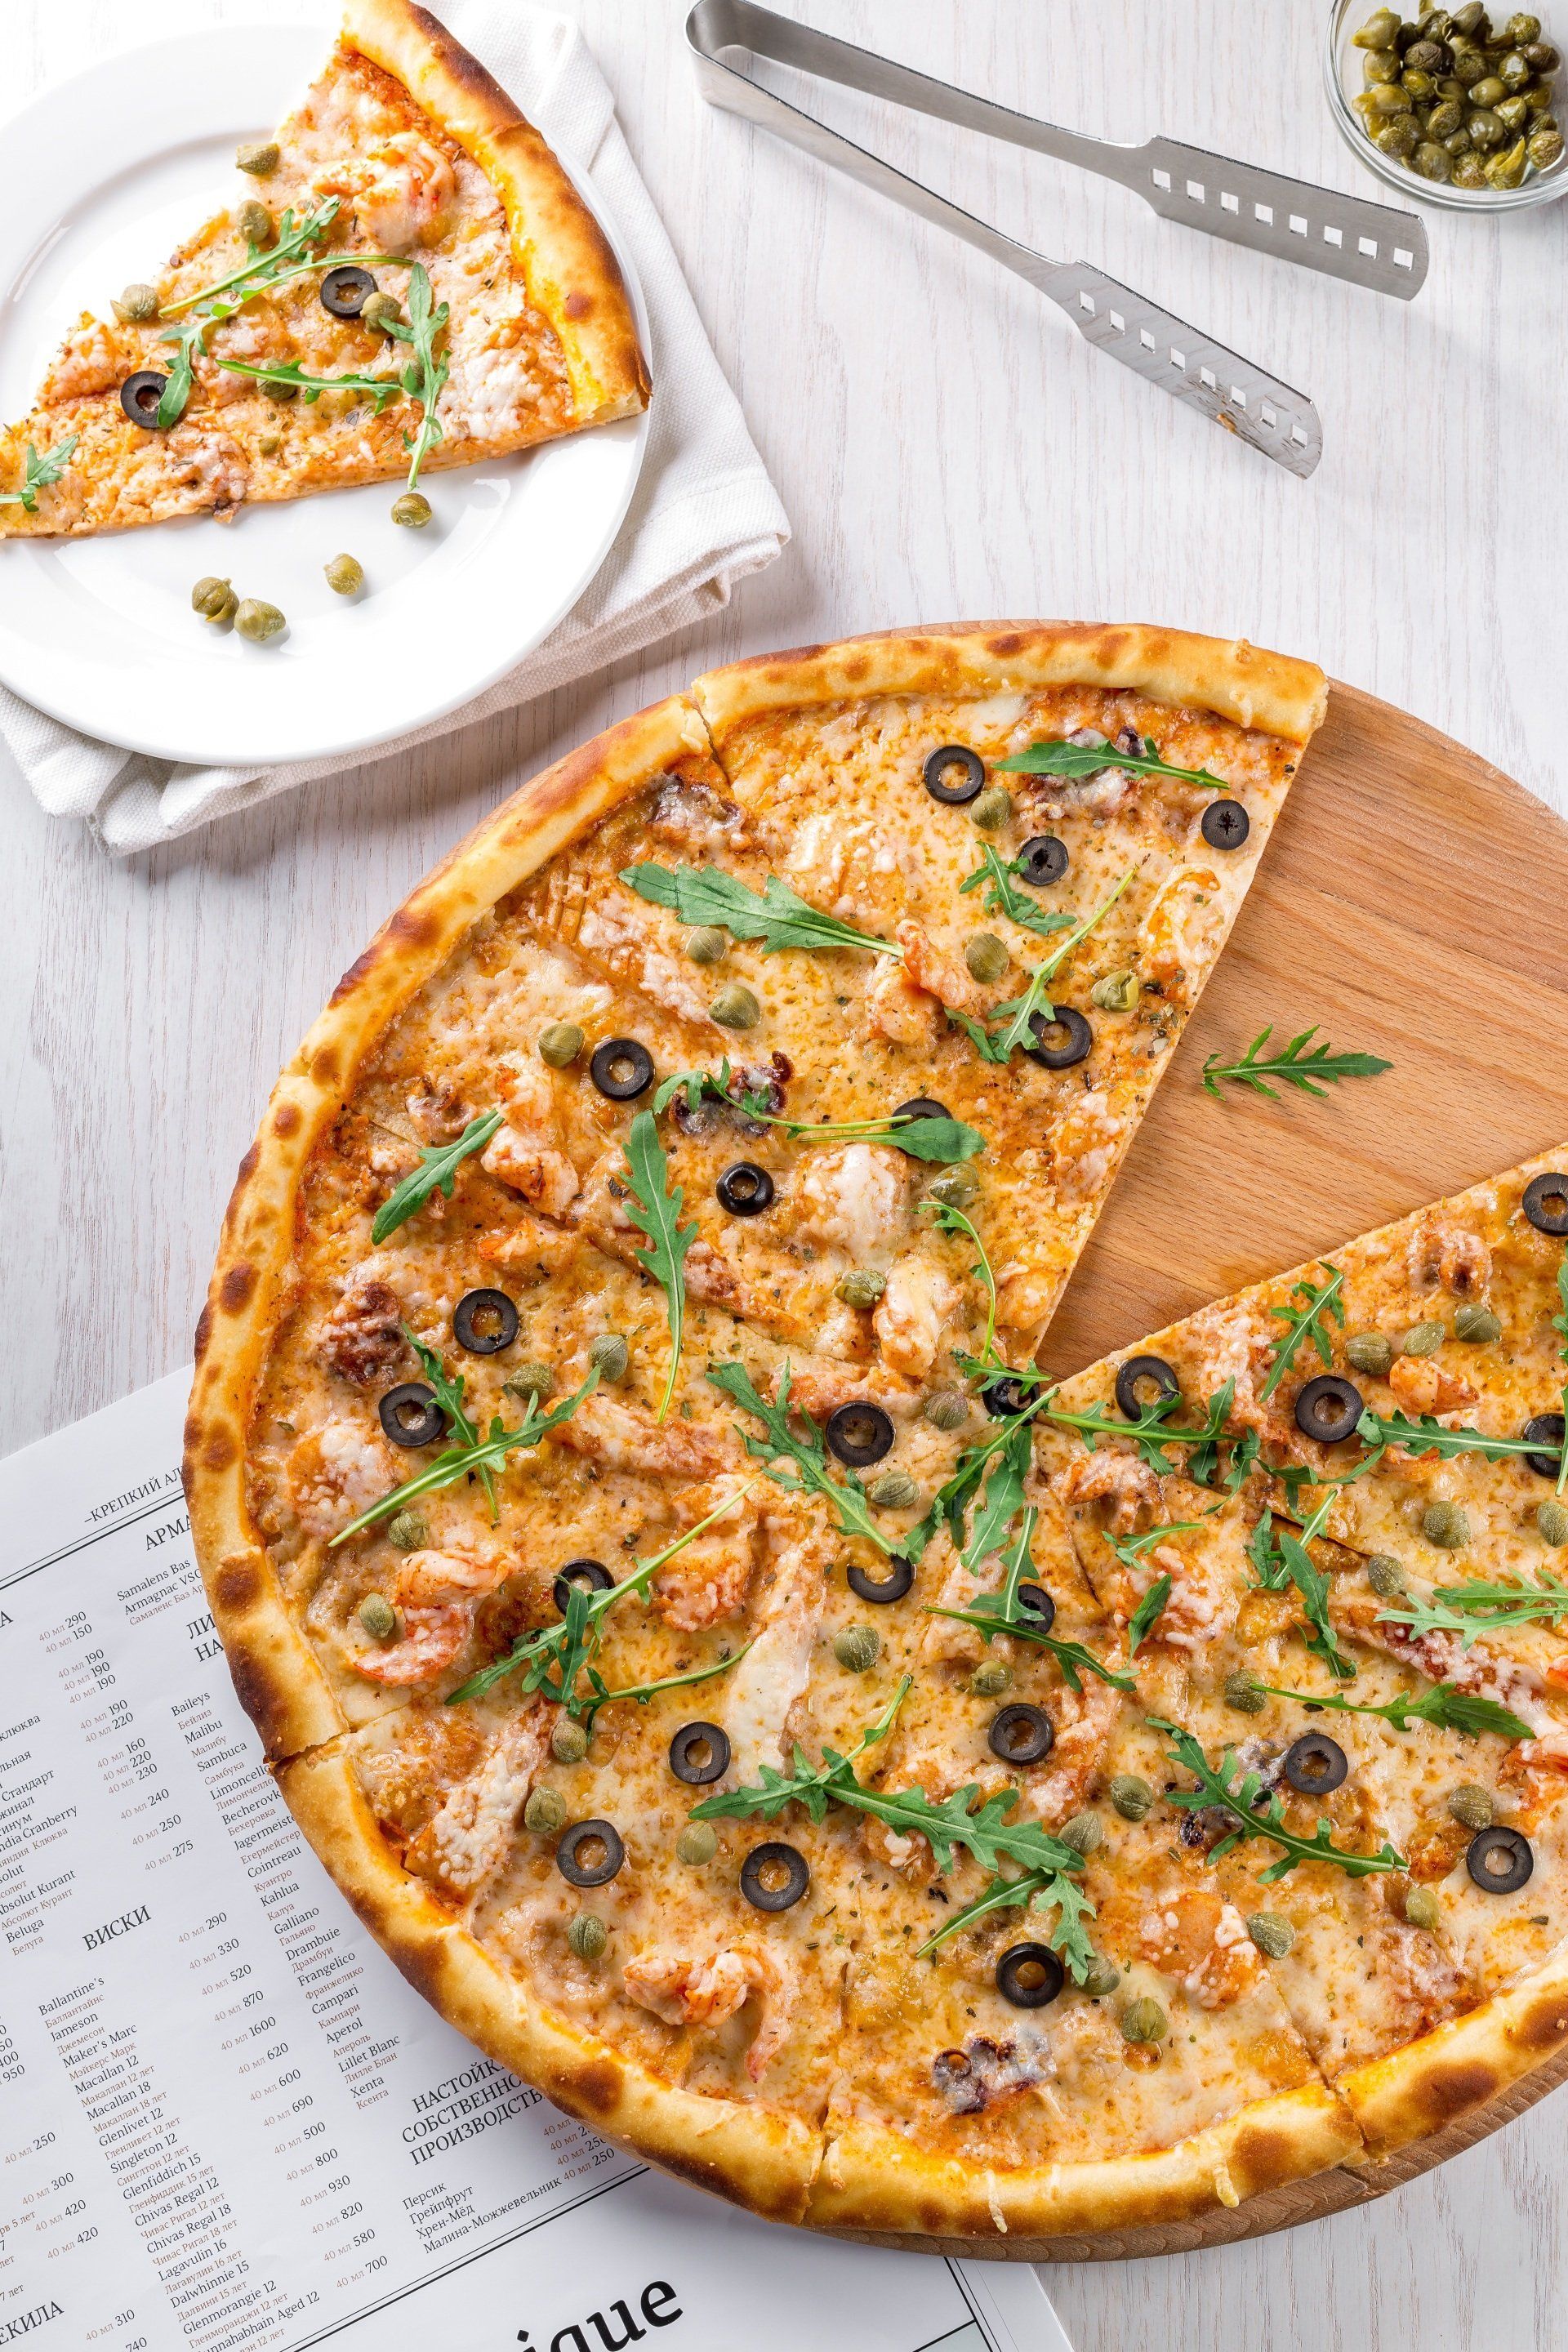 Italian-style pizza covered with fresh mozzarella, arugula, olives, and other toppings.